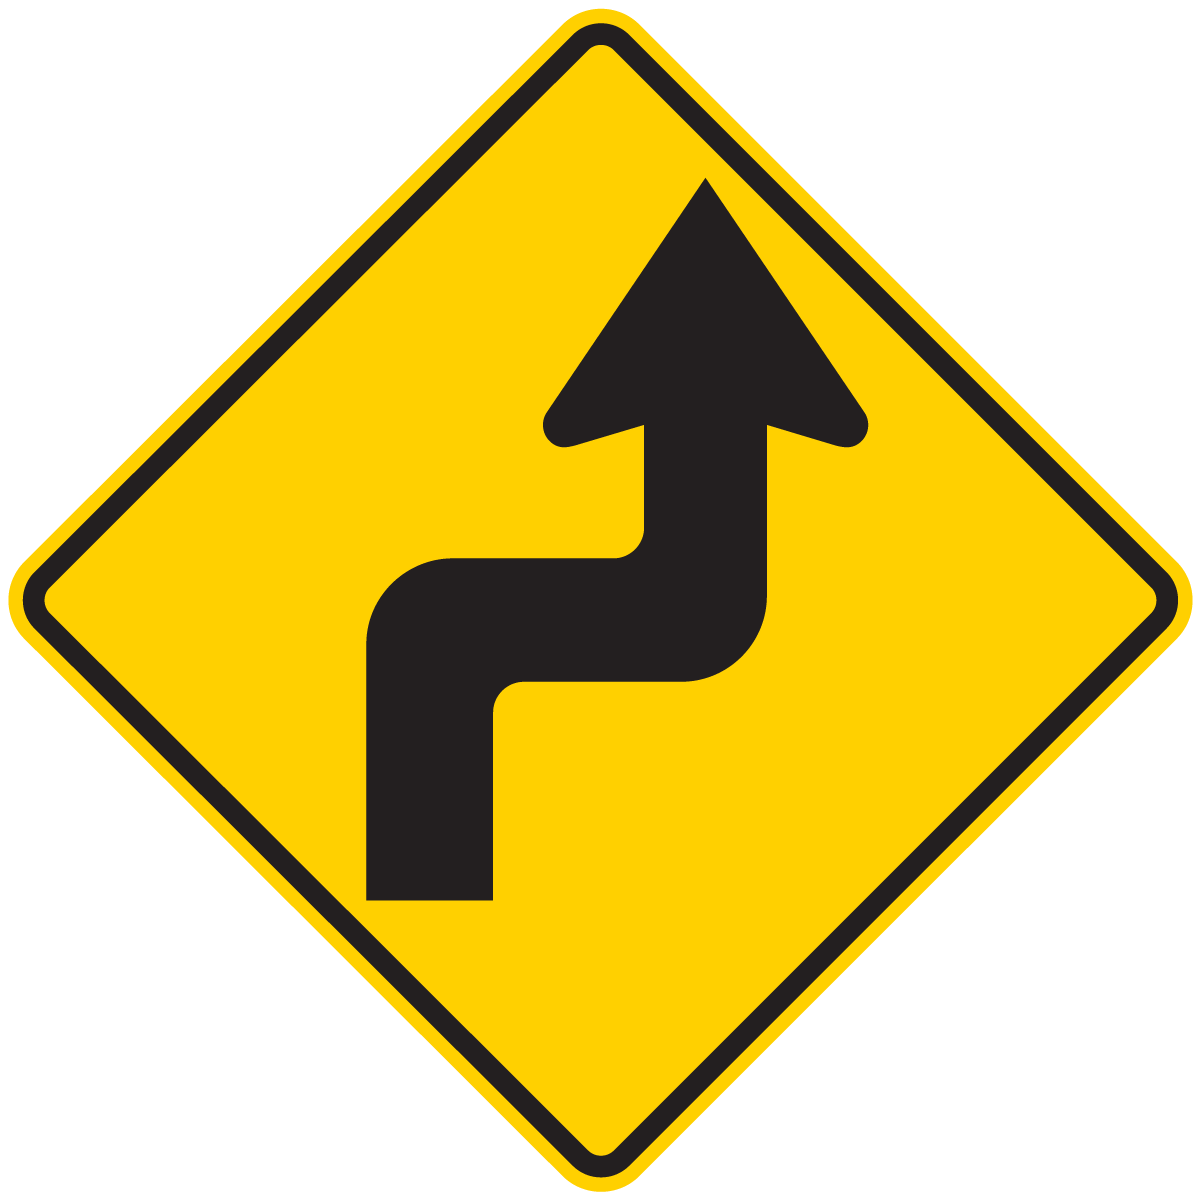 W1-3 Reverse Turn (Left or Right)